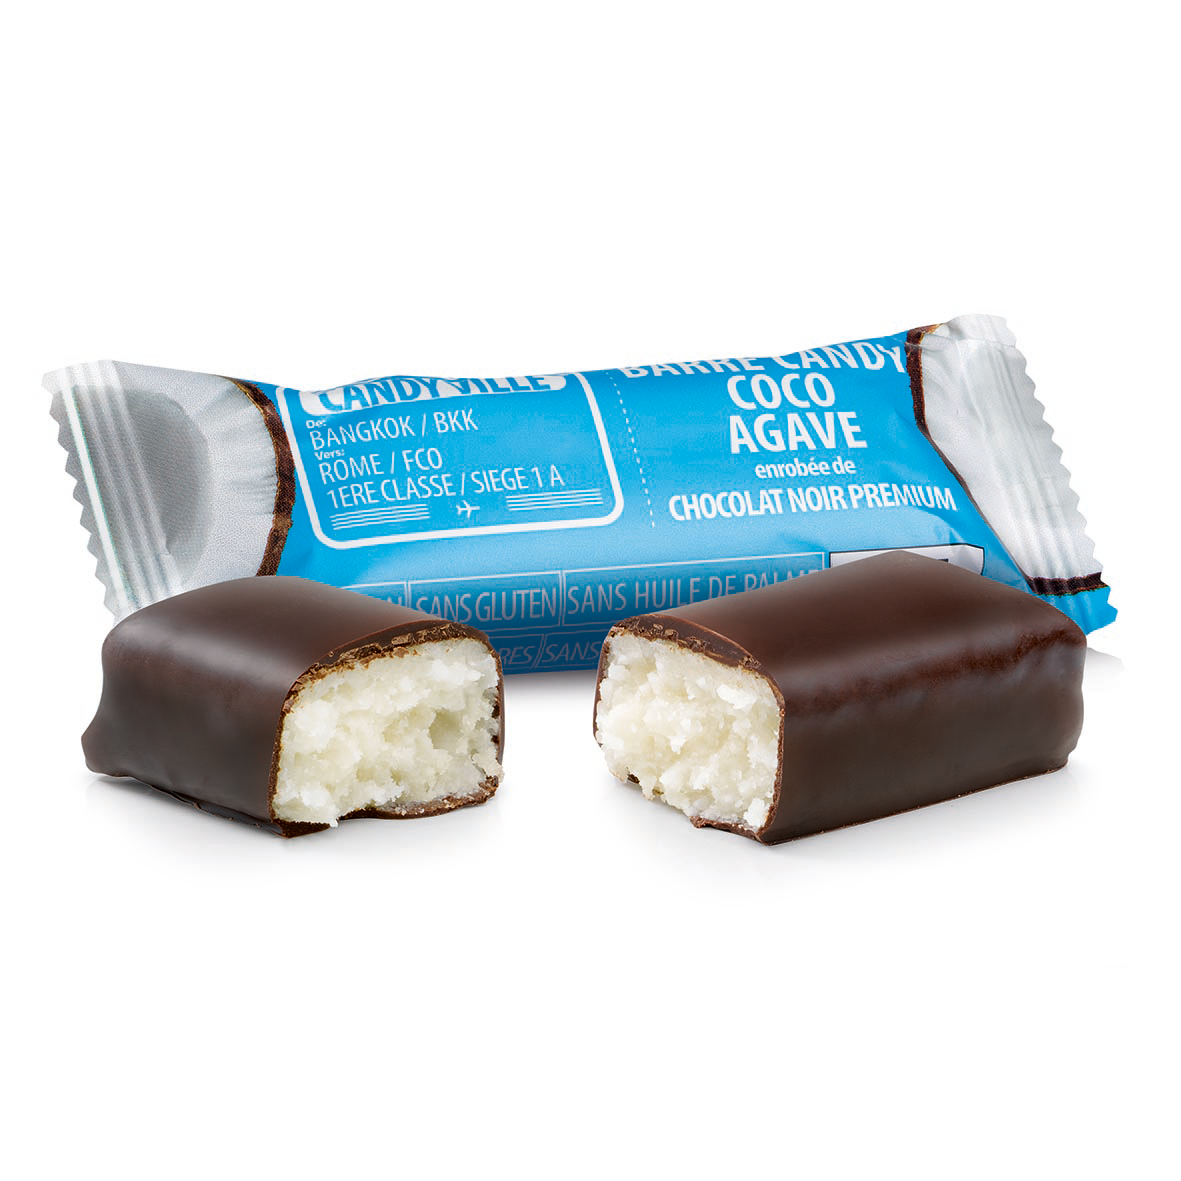 Barre Candy Coco-Agave 50g